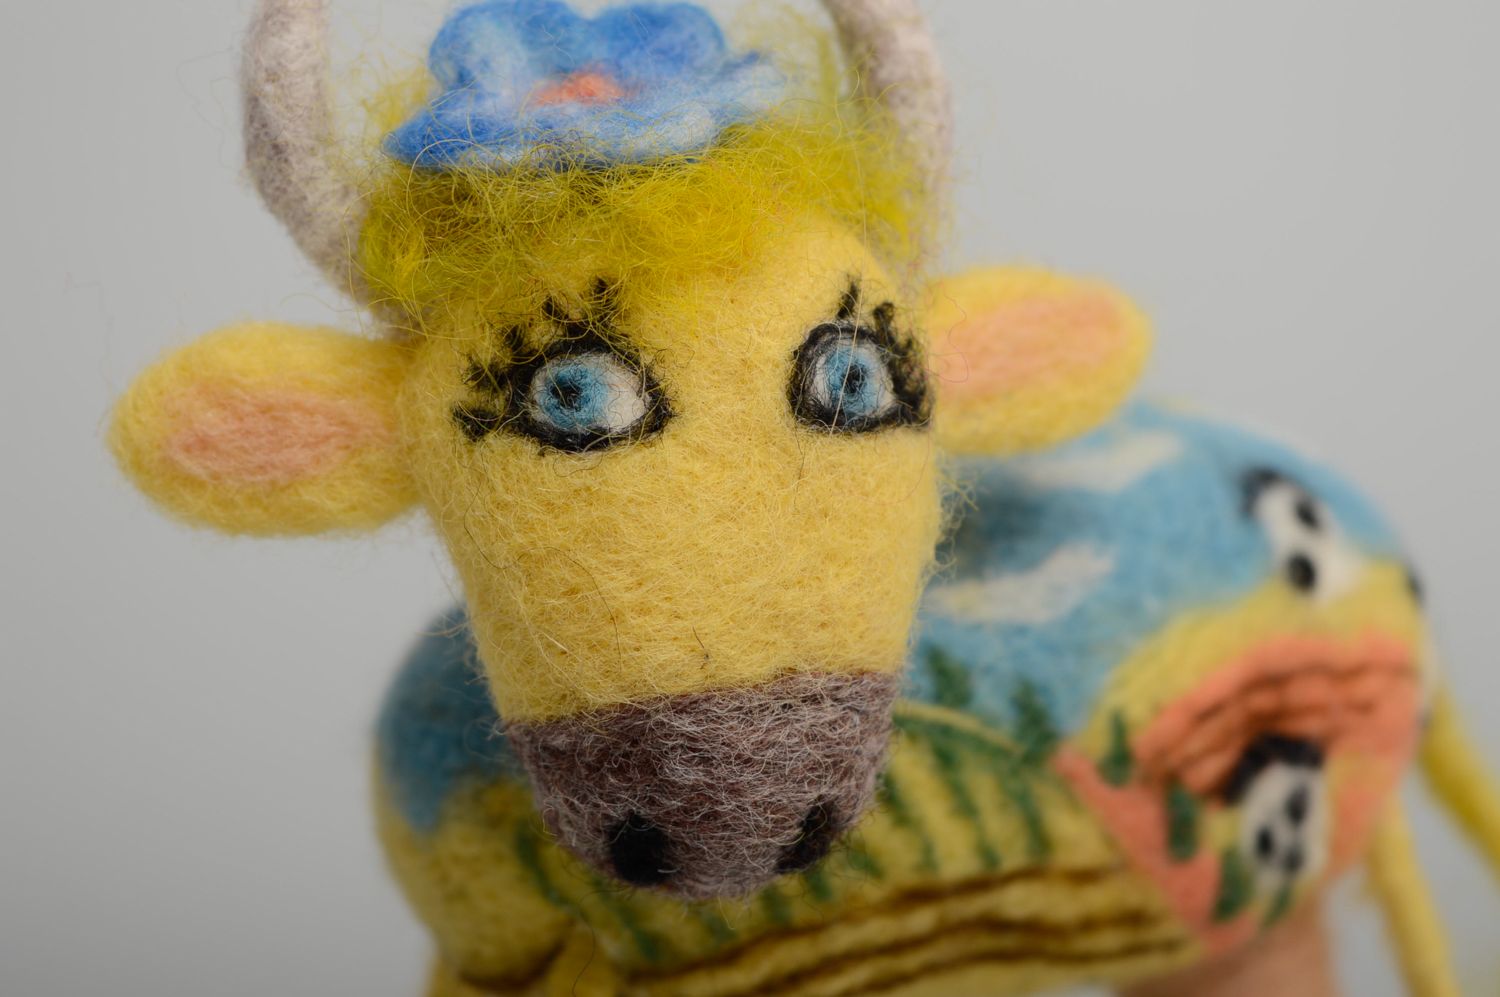 felted wool toys